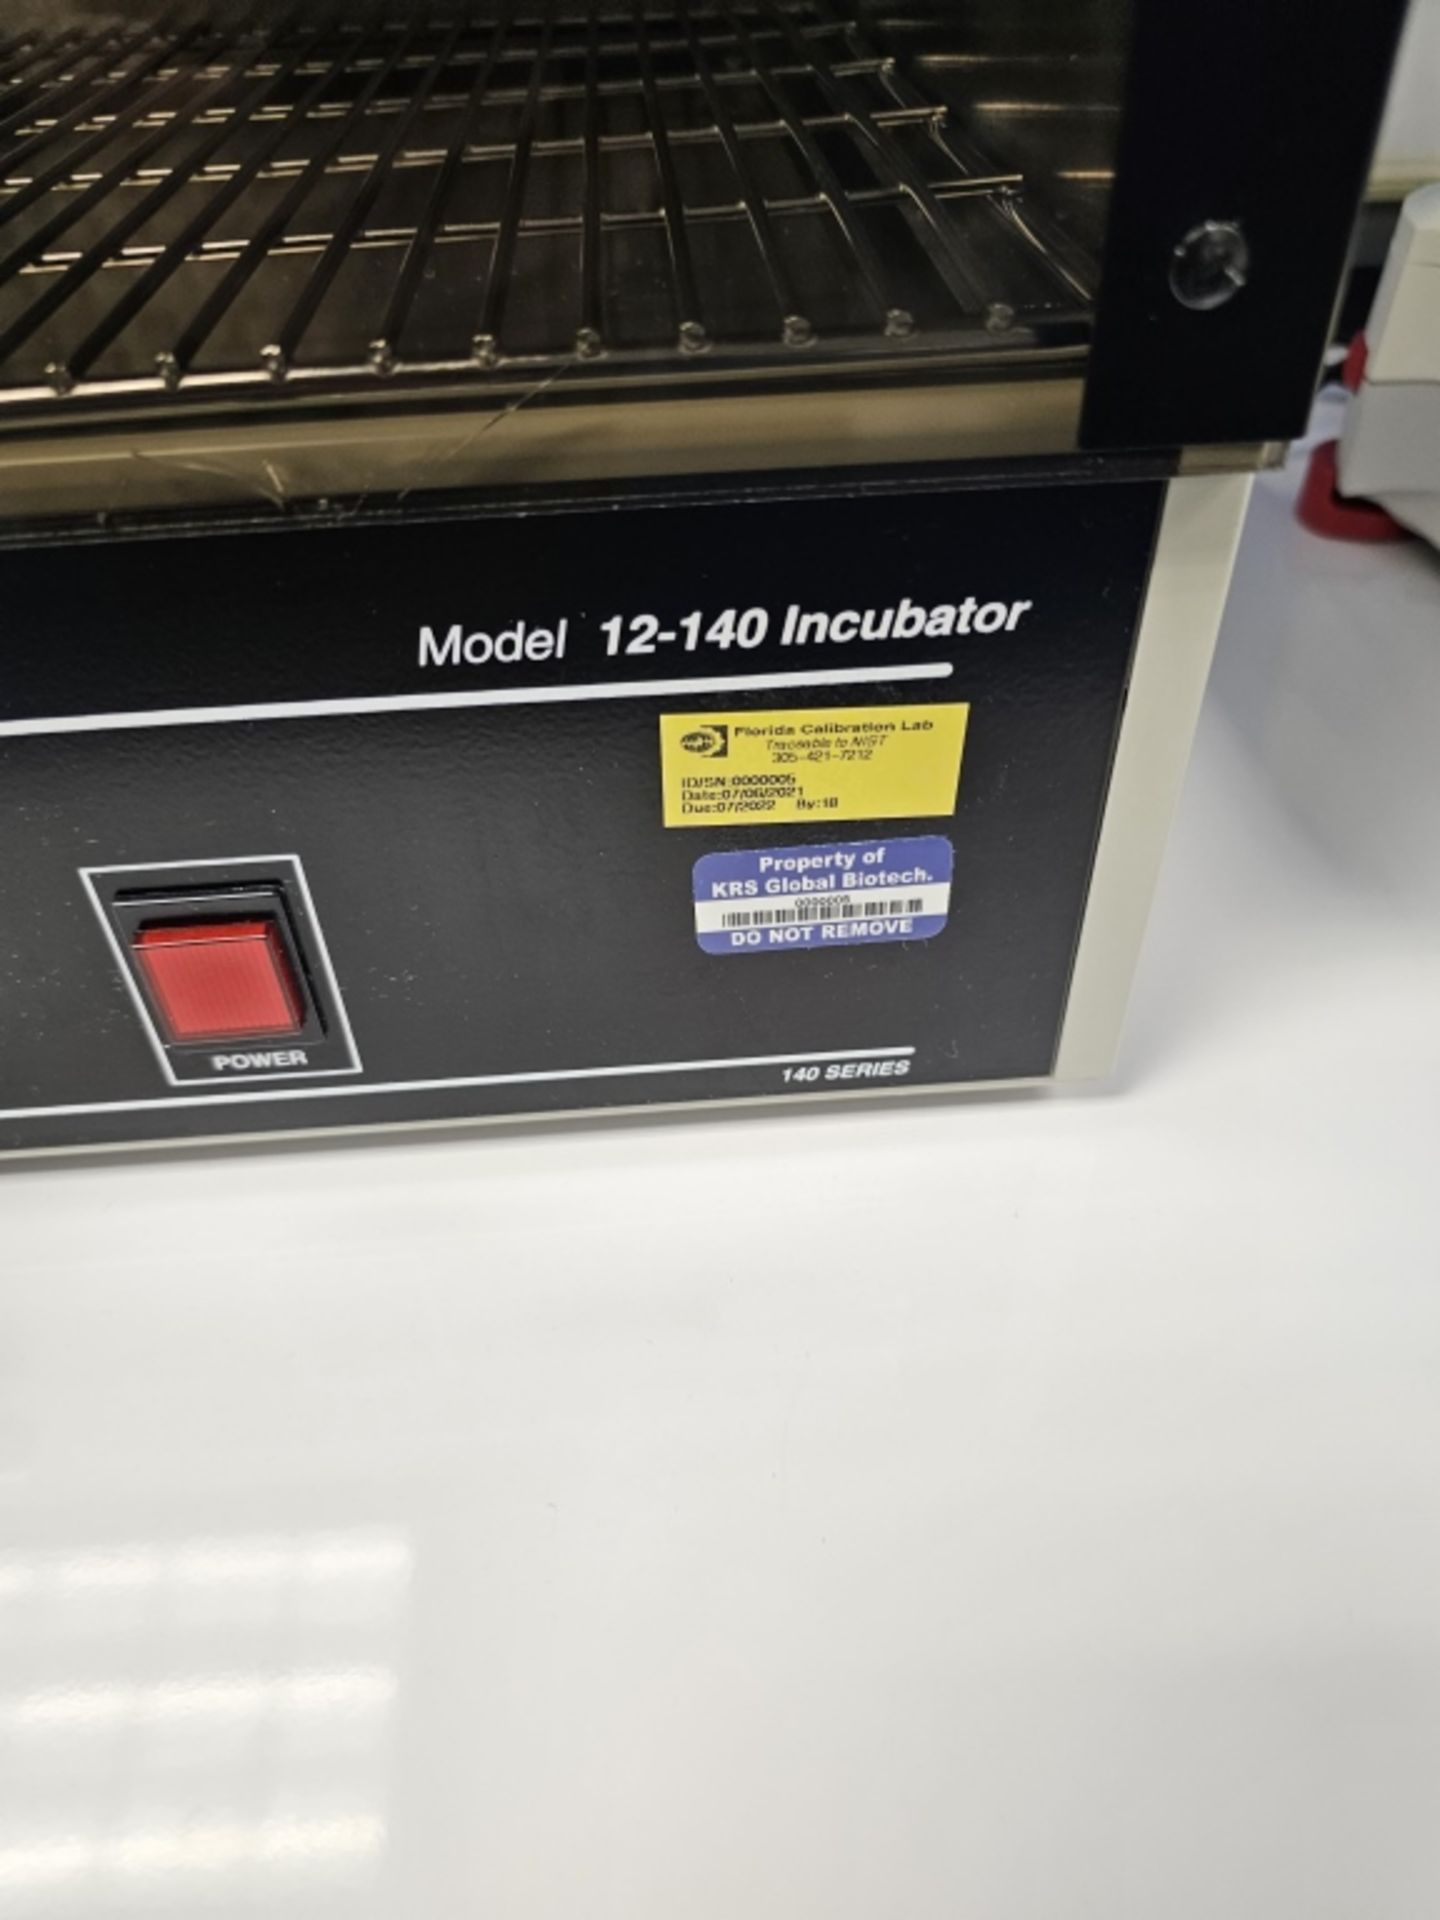 Quincy Lab 140 Series Model 12-140 Incubator sn T-07714 - Image 3 of 6